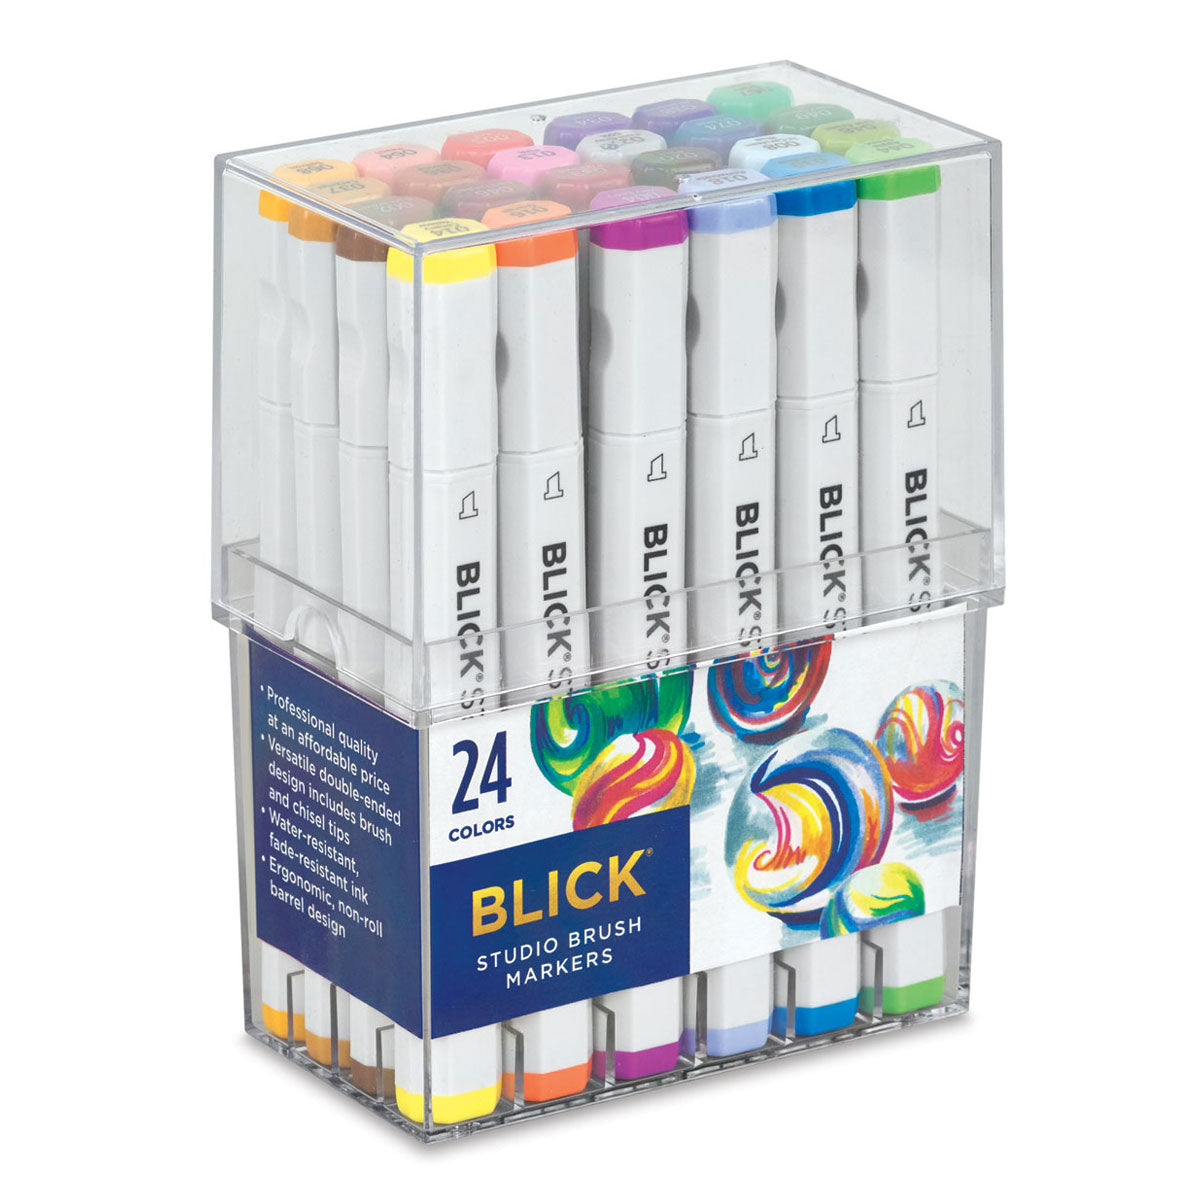 Blick Studio Brush Markers and Sets —